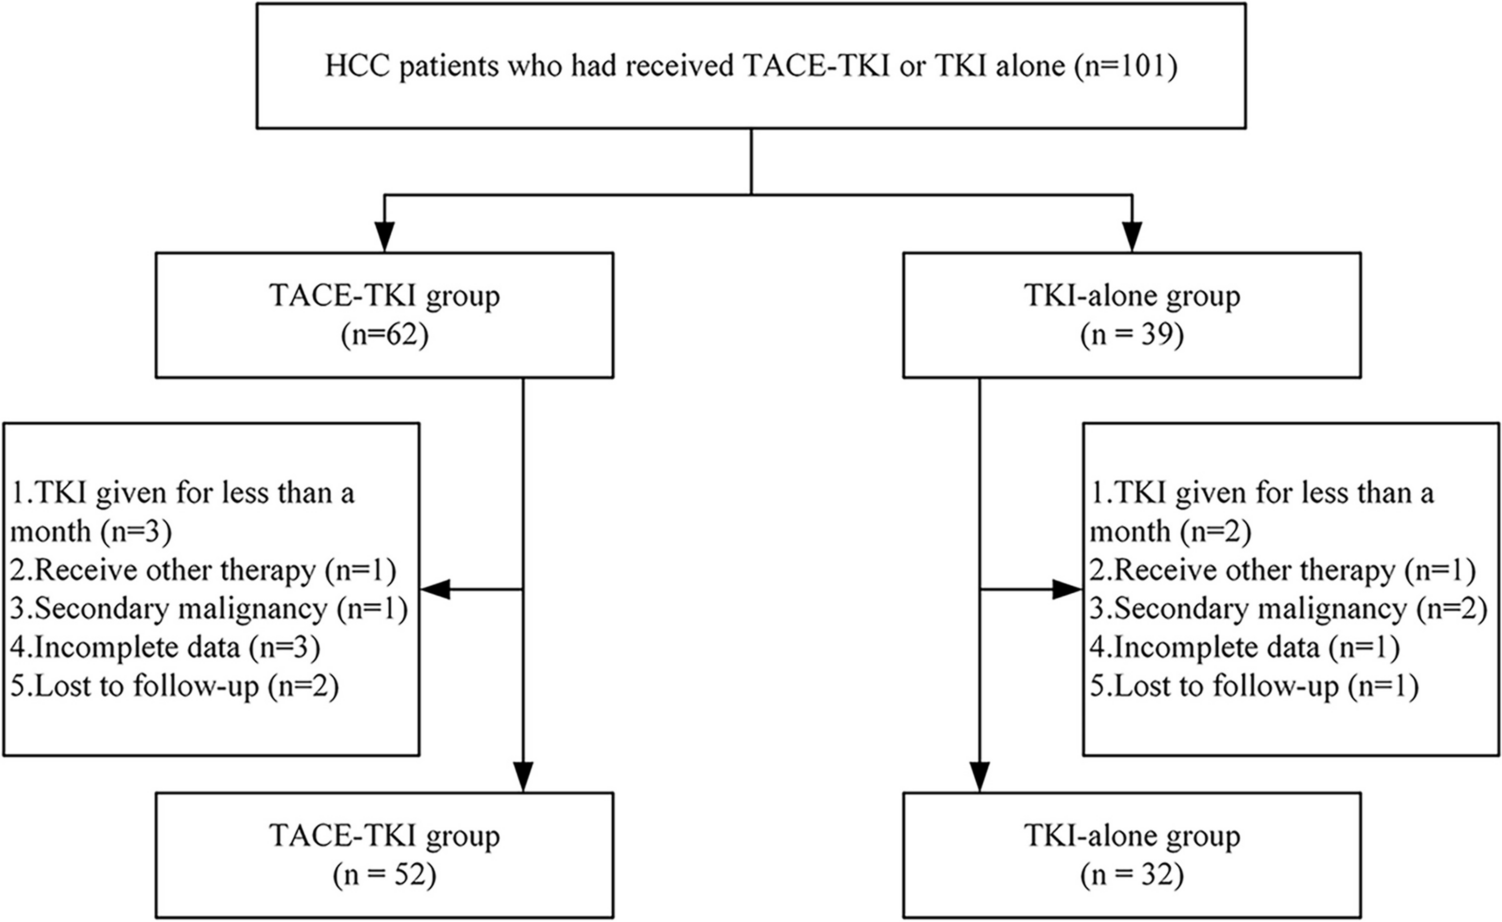 Efficacy and Safety of TACE Combined with a Tyrosine Kinase Inhibitor for the Treatment of TACE-Refractory Hepatocellular Carcinoma: A Retrospective Comparative Study